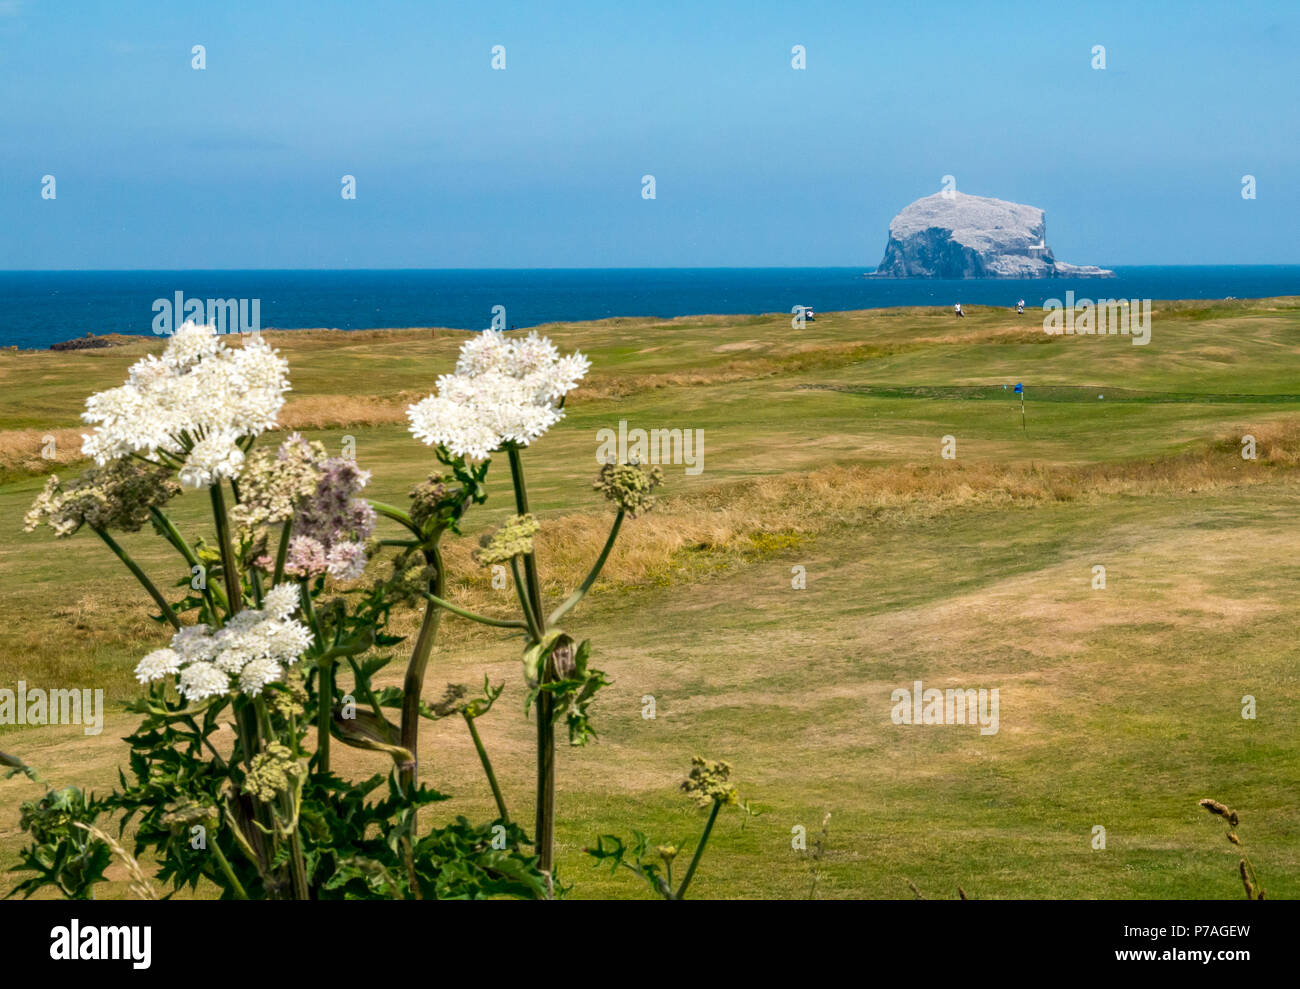 North Berwick, East Lothian, Scotland, United Kingdom, 5th July 2018.  The Bass Rock, home to the largest Northern gannet colony, sparkling white in the sunshine with nesting gannets and a mass of seabirds flying around it on a sunny Summer day with wold flowers in foreground.  Golfers out on Glen Golf Course beside the Firth of Forth Stock Photo